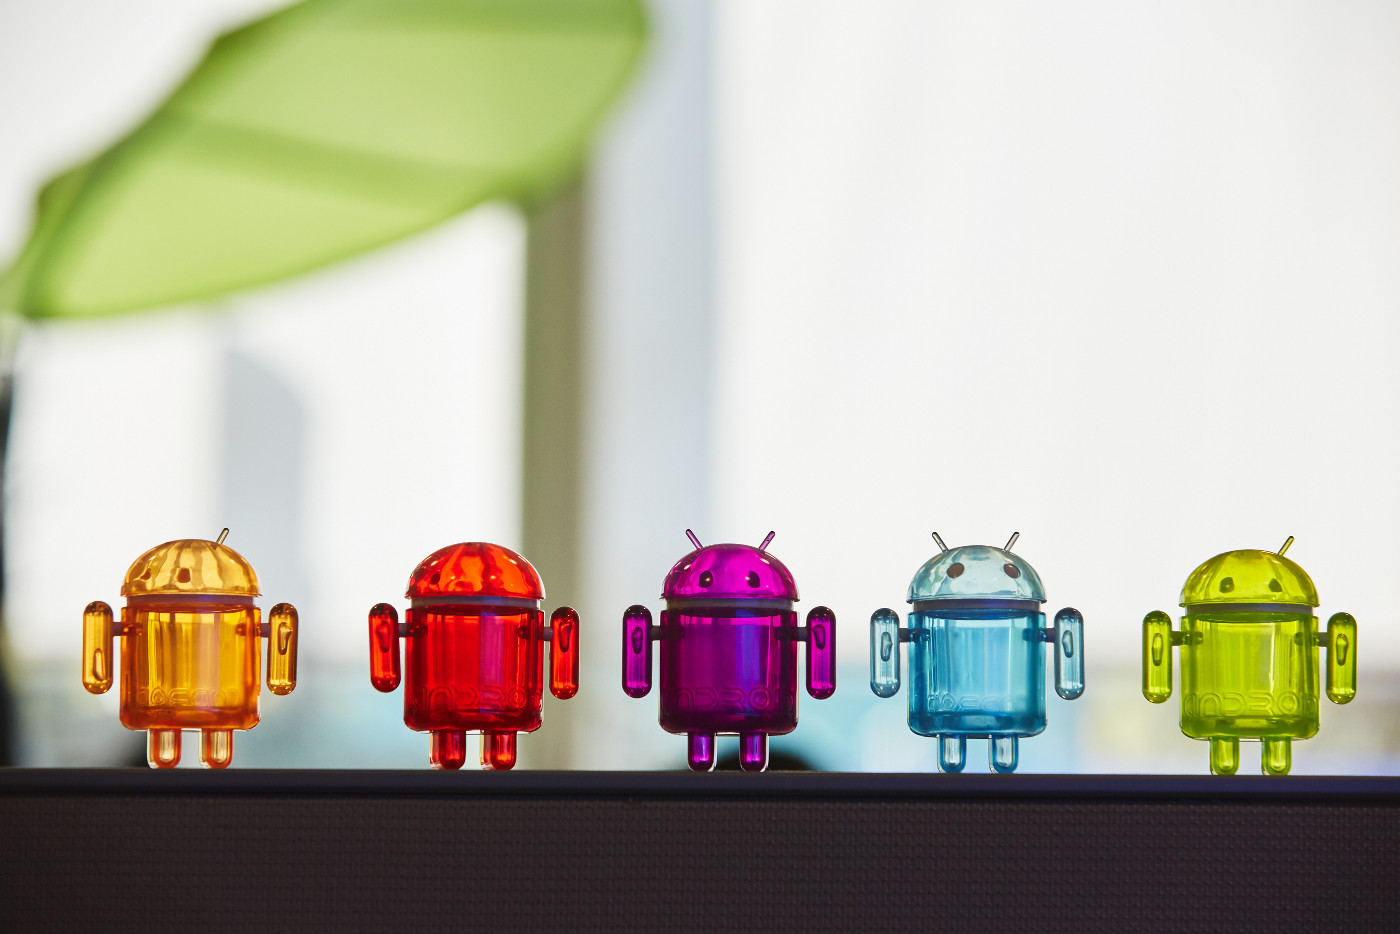 Android Bots